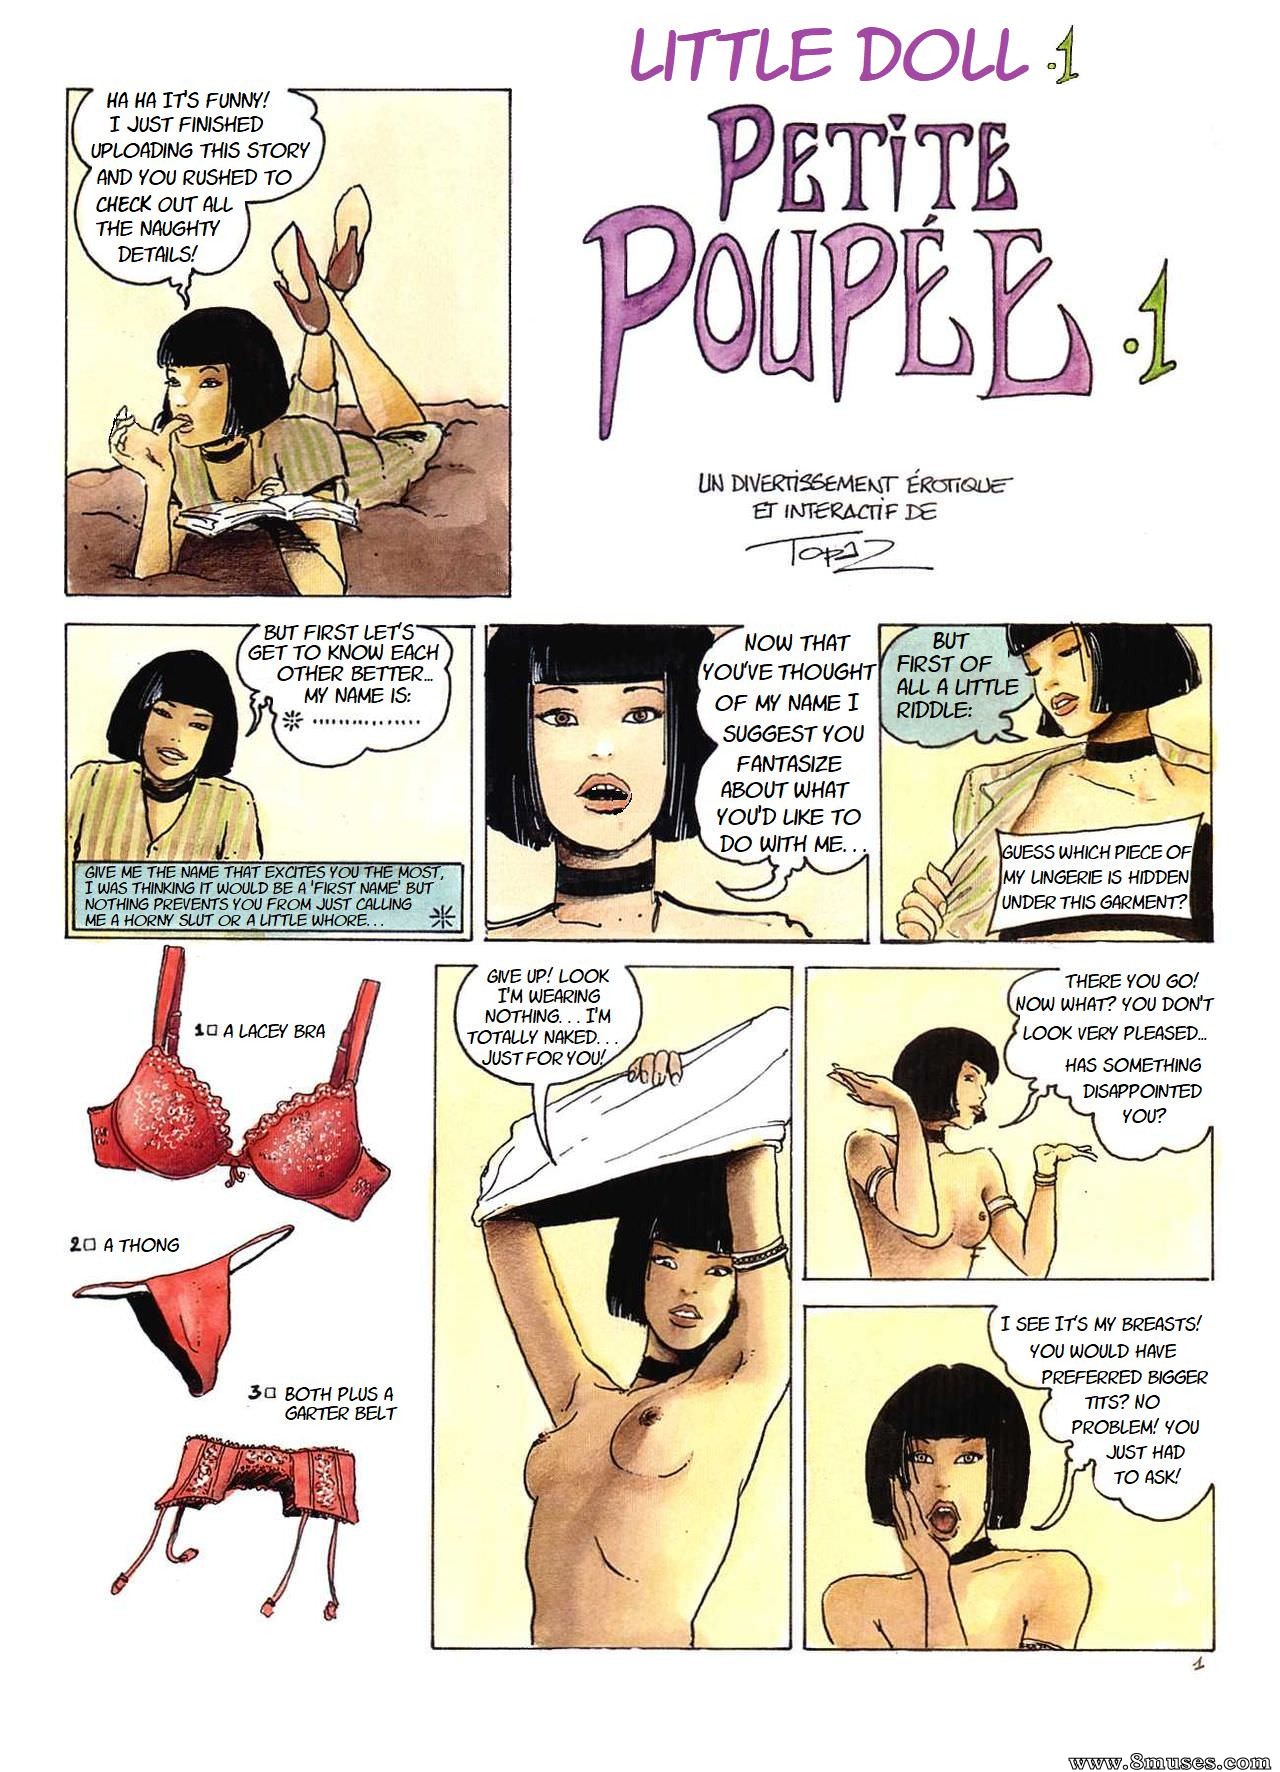 Little Doll - Petite Poupee Issue 1 - 8muses Comics - Sex Comics and Porn  Cartoons